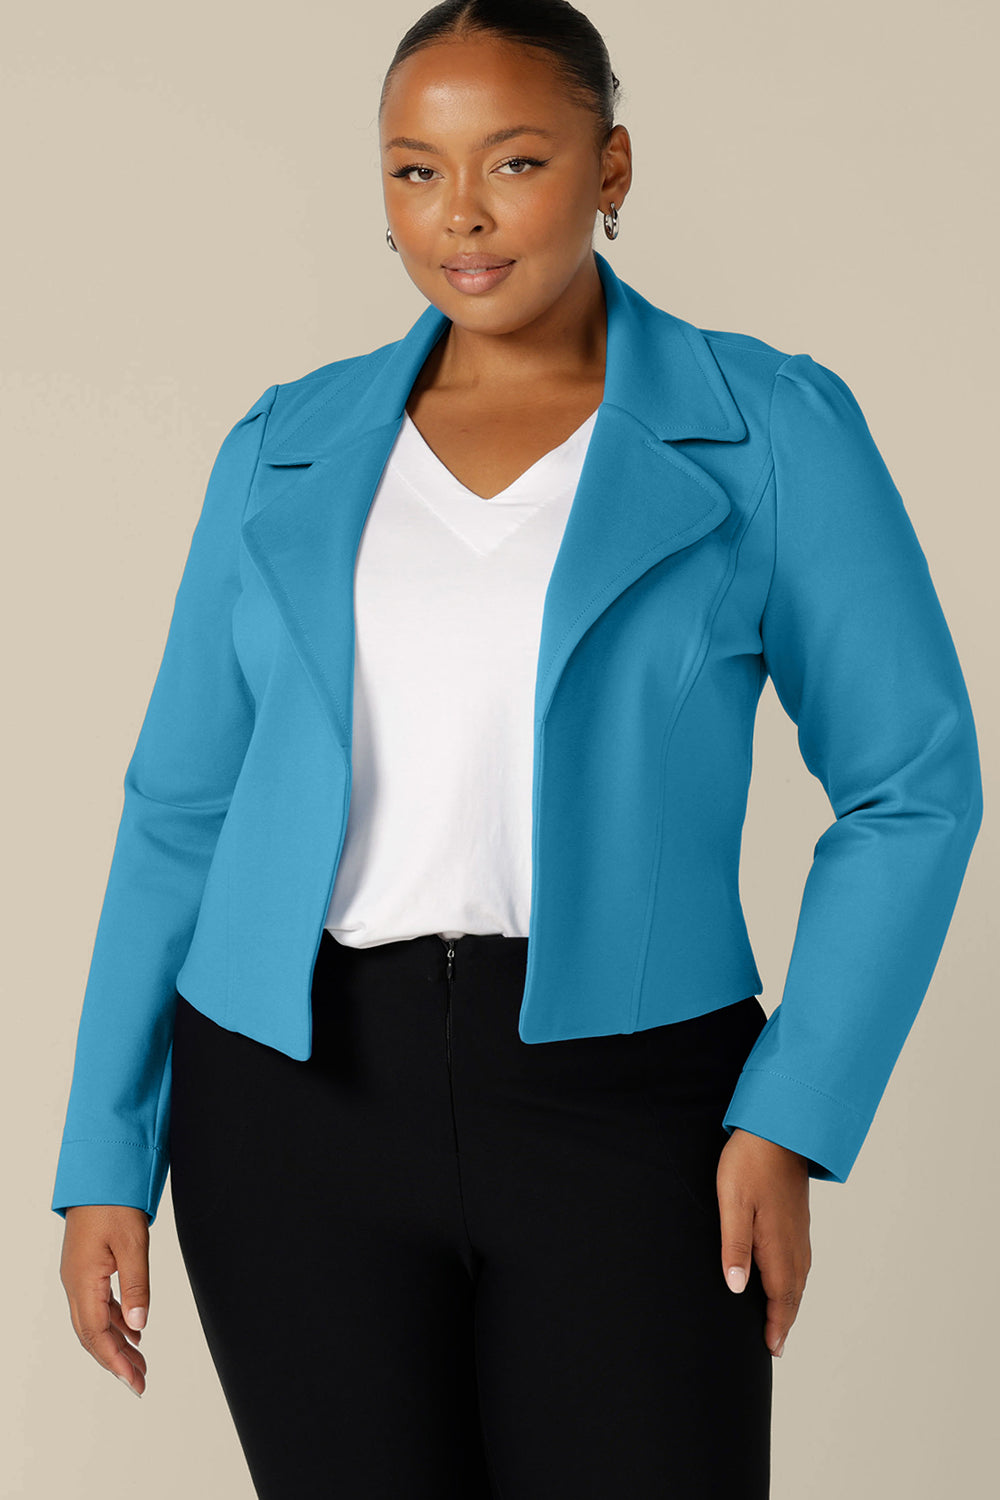 Made in Australia by Australian and New Zealand women's clothing label, L&F, this is the Garcia Jacket in Opal, made from stretch ponte fabric. Open-fronted and tailored to fit, this good work wear jacket is available to buy in sizes 8 to 24.A size 18, plus size woman wears the Garcia Jacket in Opal blue ponte fabric by Australian and New Zealand women's clothing label, L&F. Featuring collar and notch lapels and long sleeves, this open-fronted jacket is available in an inclusive size range of sizes 8 to 24.